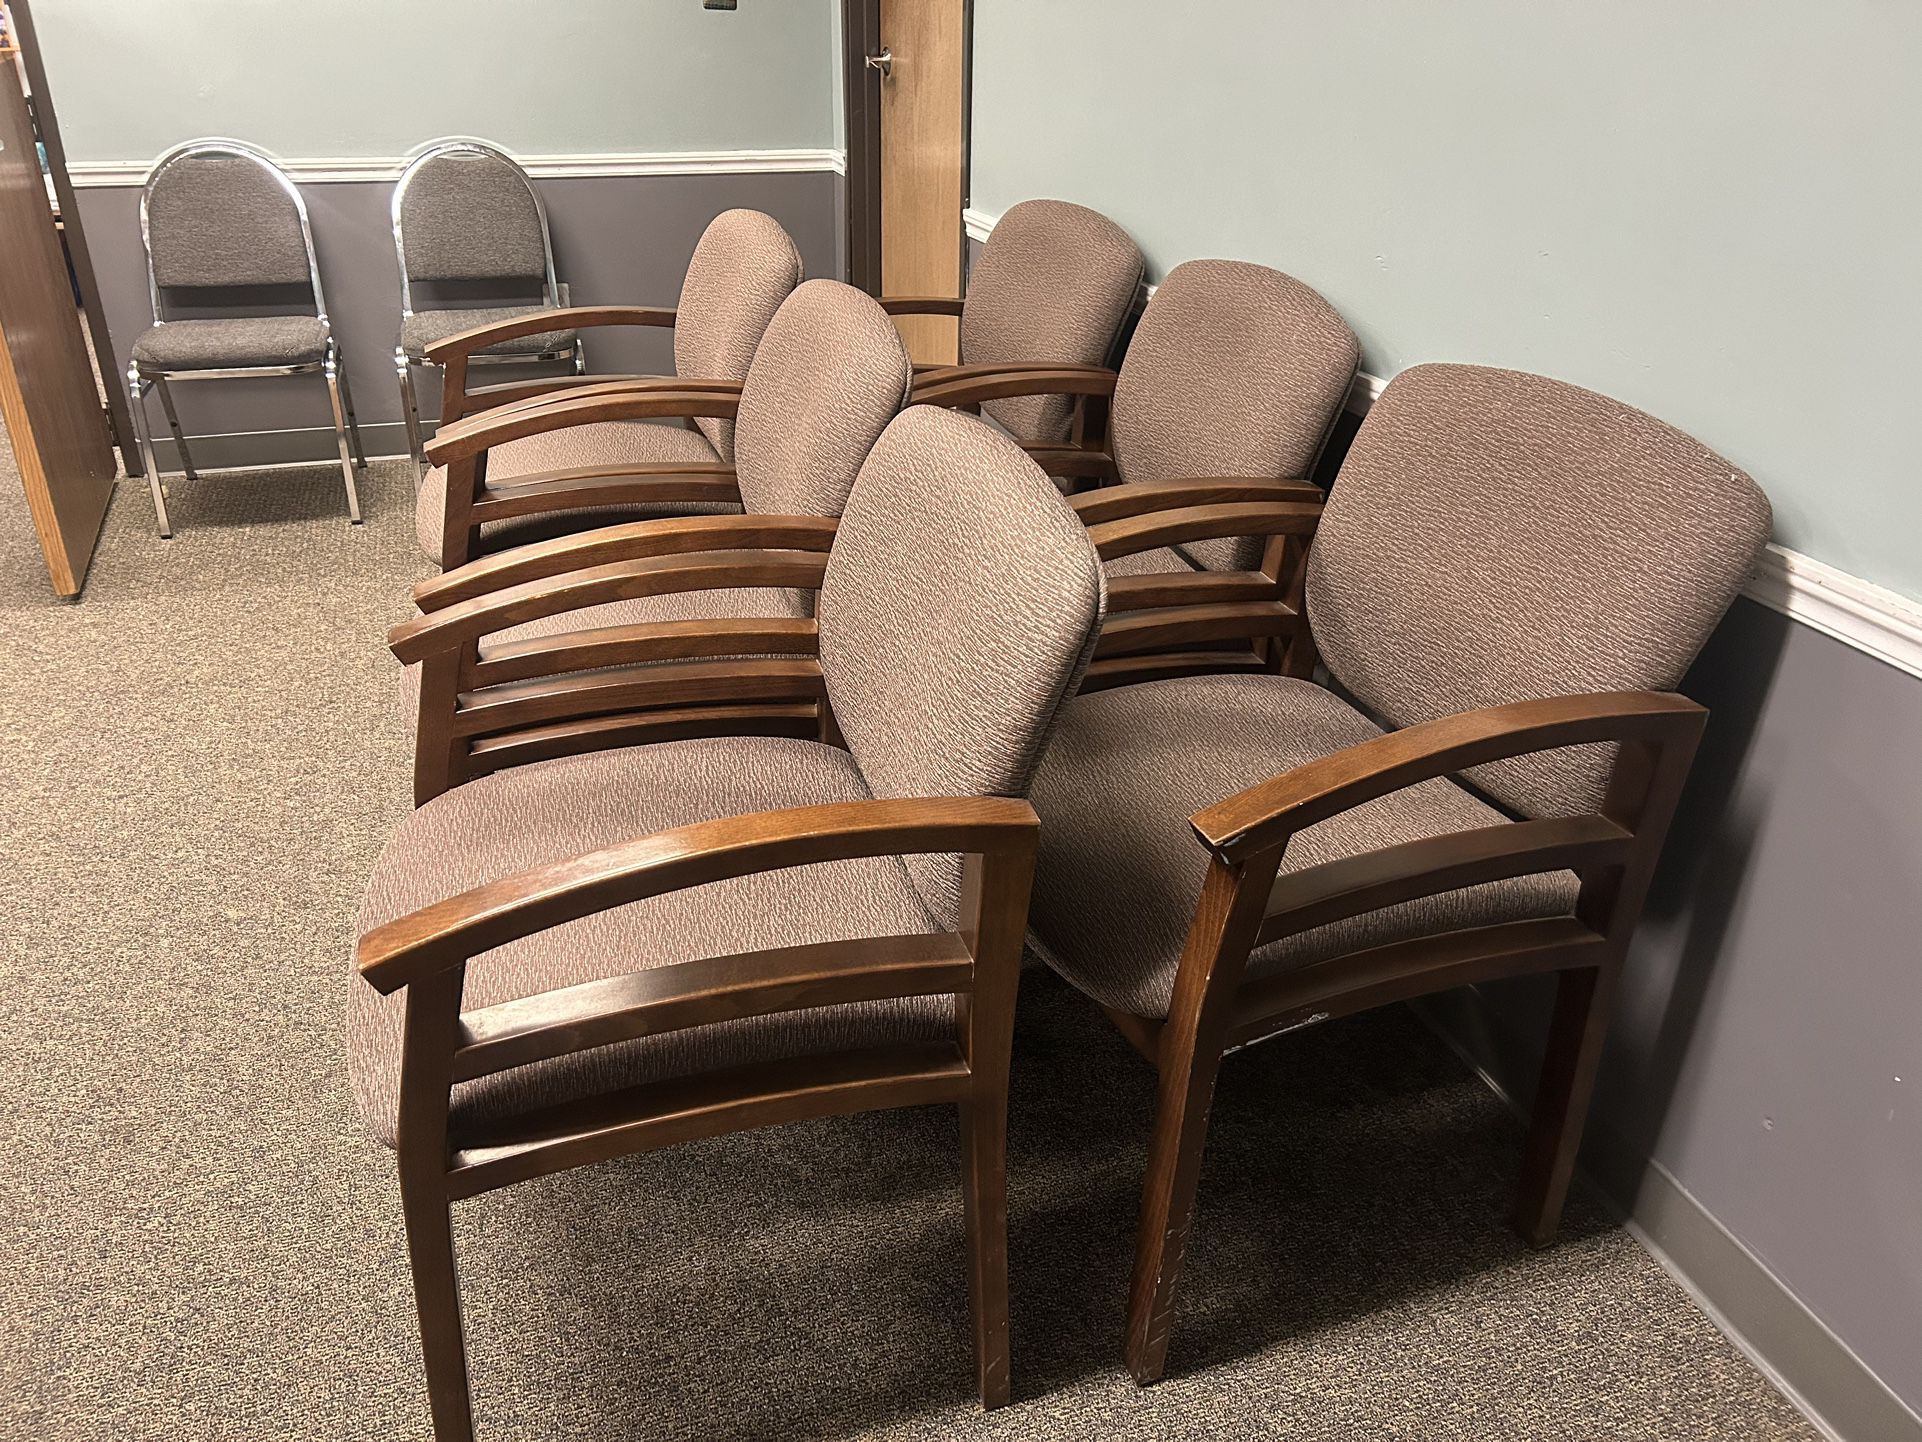 Guest Chairs, Waiting Room , Receiving,  Client  Chairs